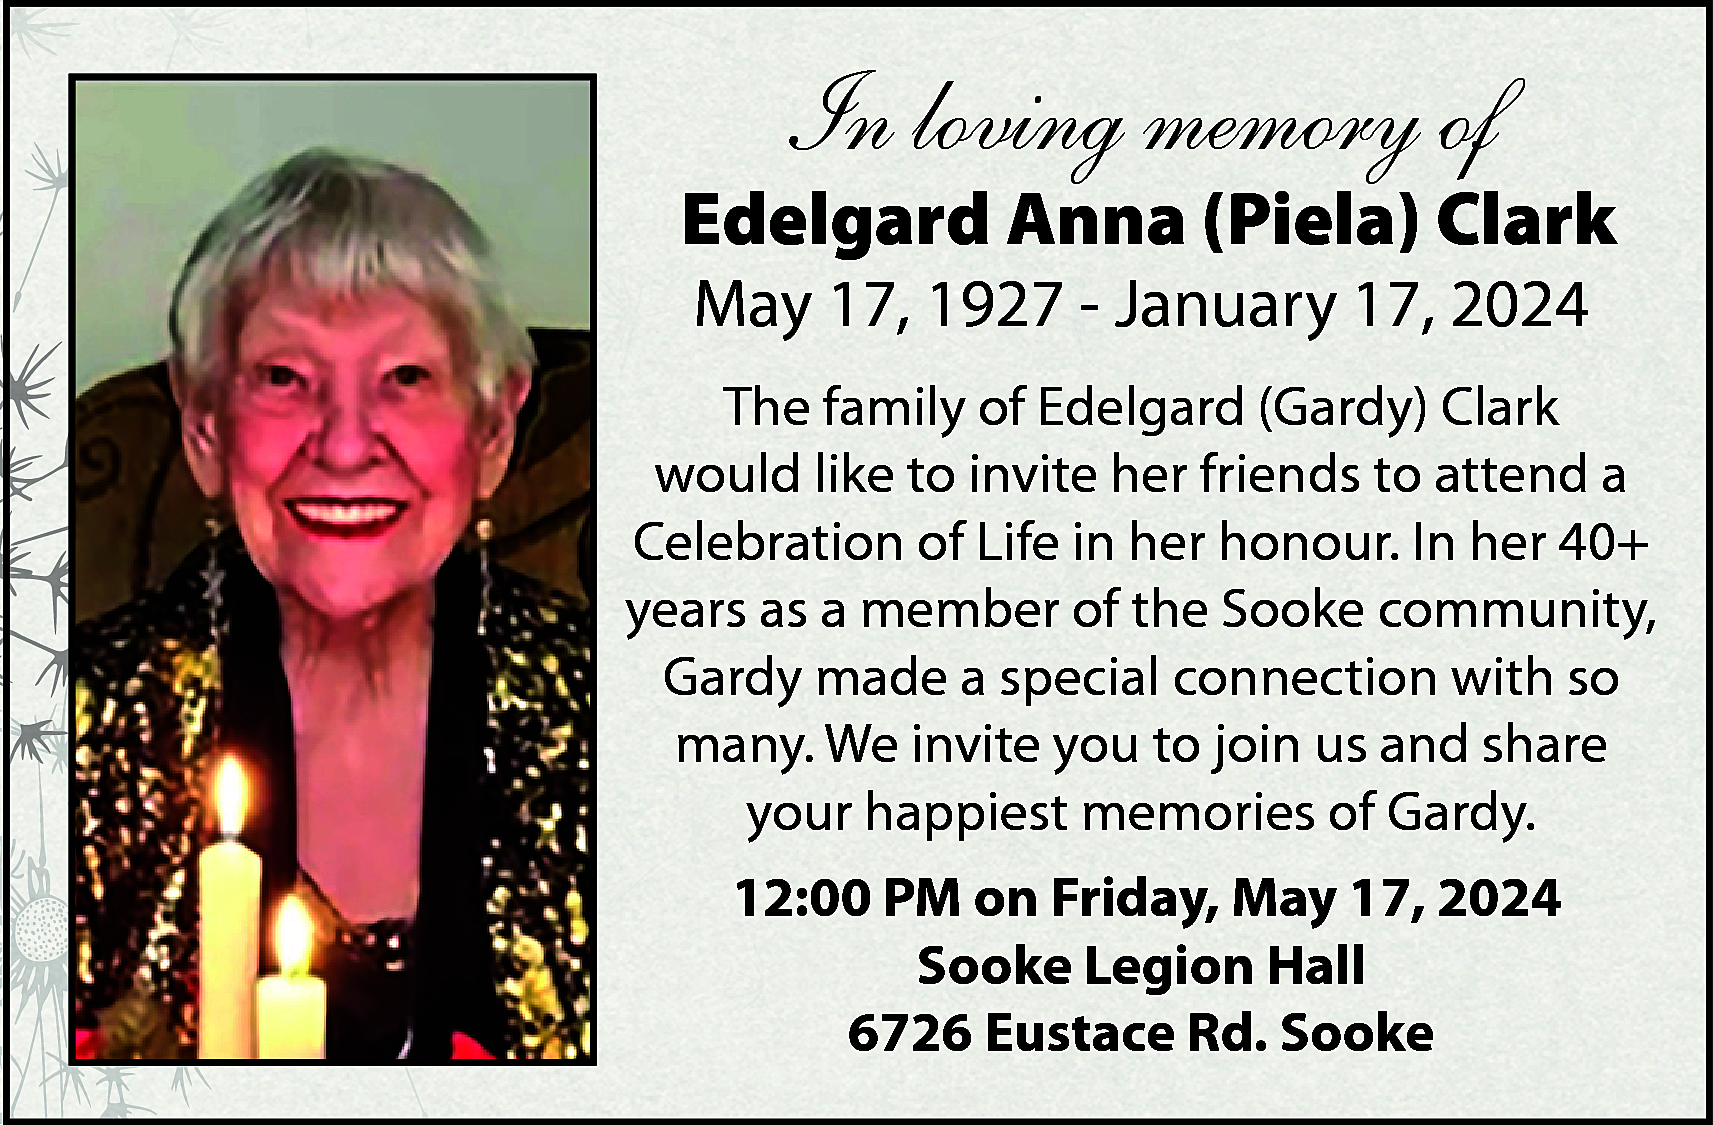 In loving memory of <br>  In loving memory of    Edelgard Anna (Piela) Clark  May 17, 1927 - January 17, 2024    The family of Edelgard (Gardy) Clark  would like to invite her friends to attend a  Celebration of Life in her honour. In her 40+  years as a member of the Sooke community,  Gardy made a special connection with so  many. We invite you to join us and share  your happiest memories of Gardy.  12:00 PM on Friday, May 17, 2024  Sooke Legion Hall  6726 Eustace Rd. Sooke    